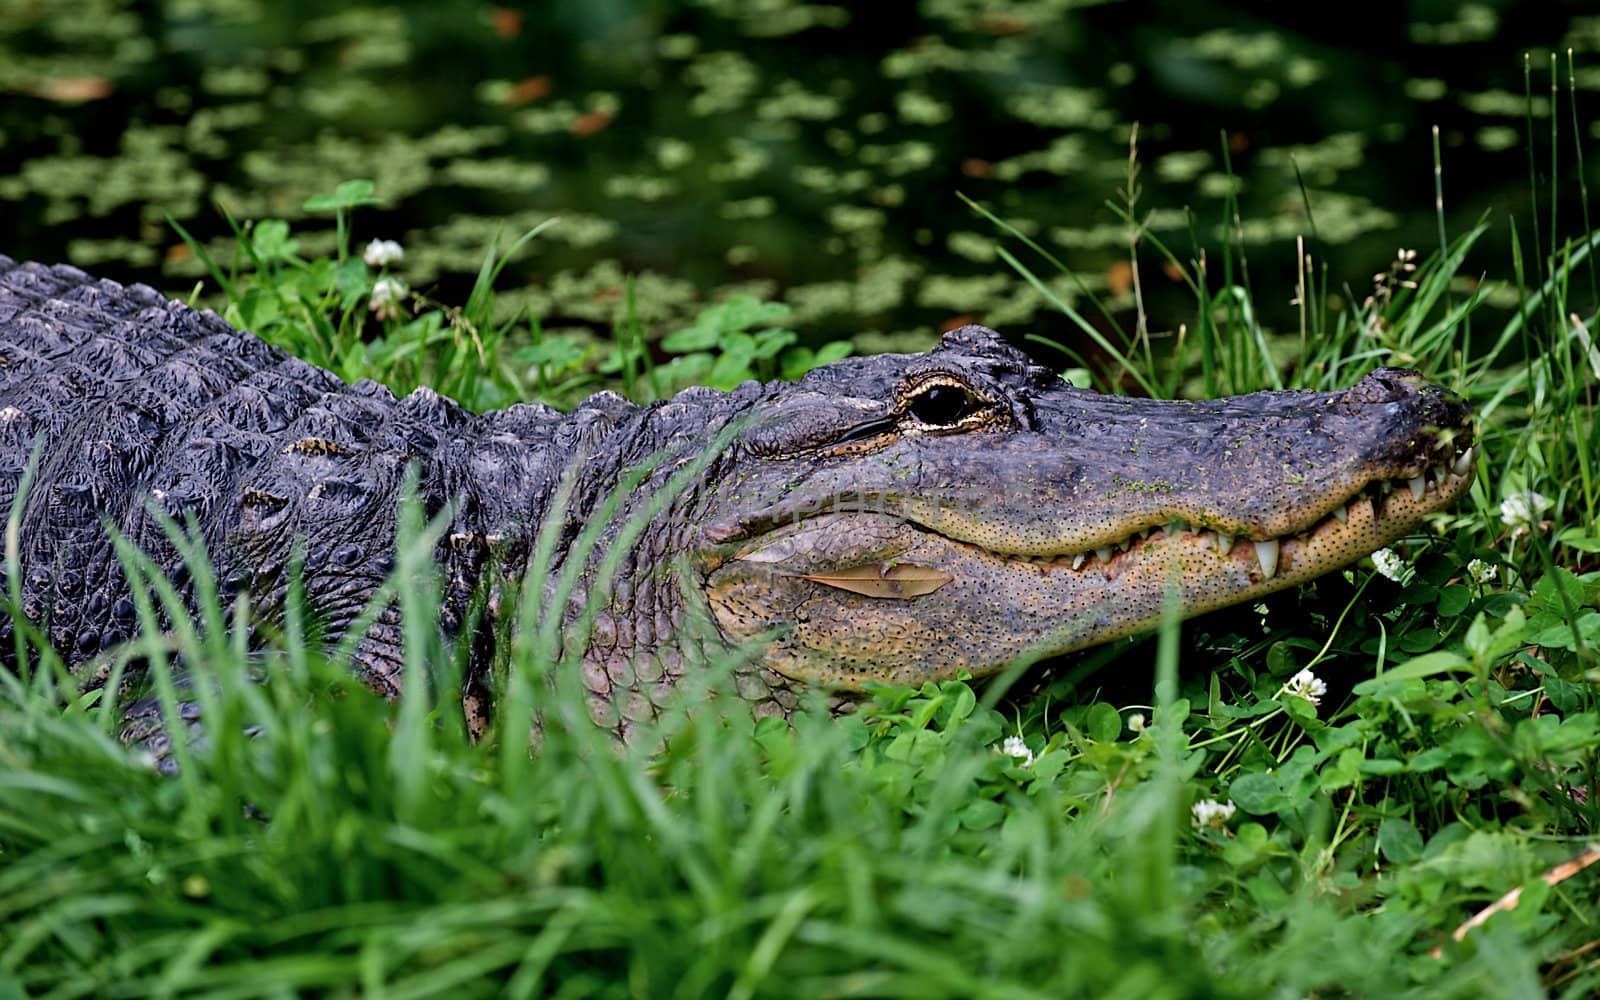 The endangered species American Alligator surrounded by his natural aquatic habitat.